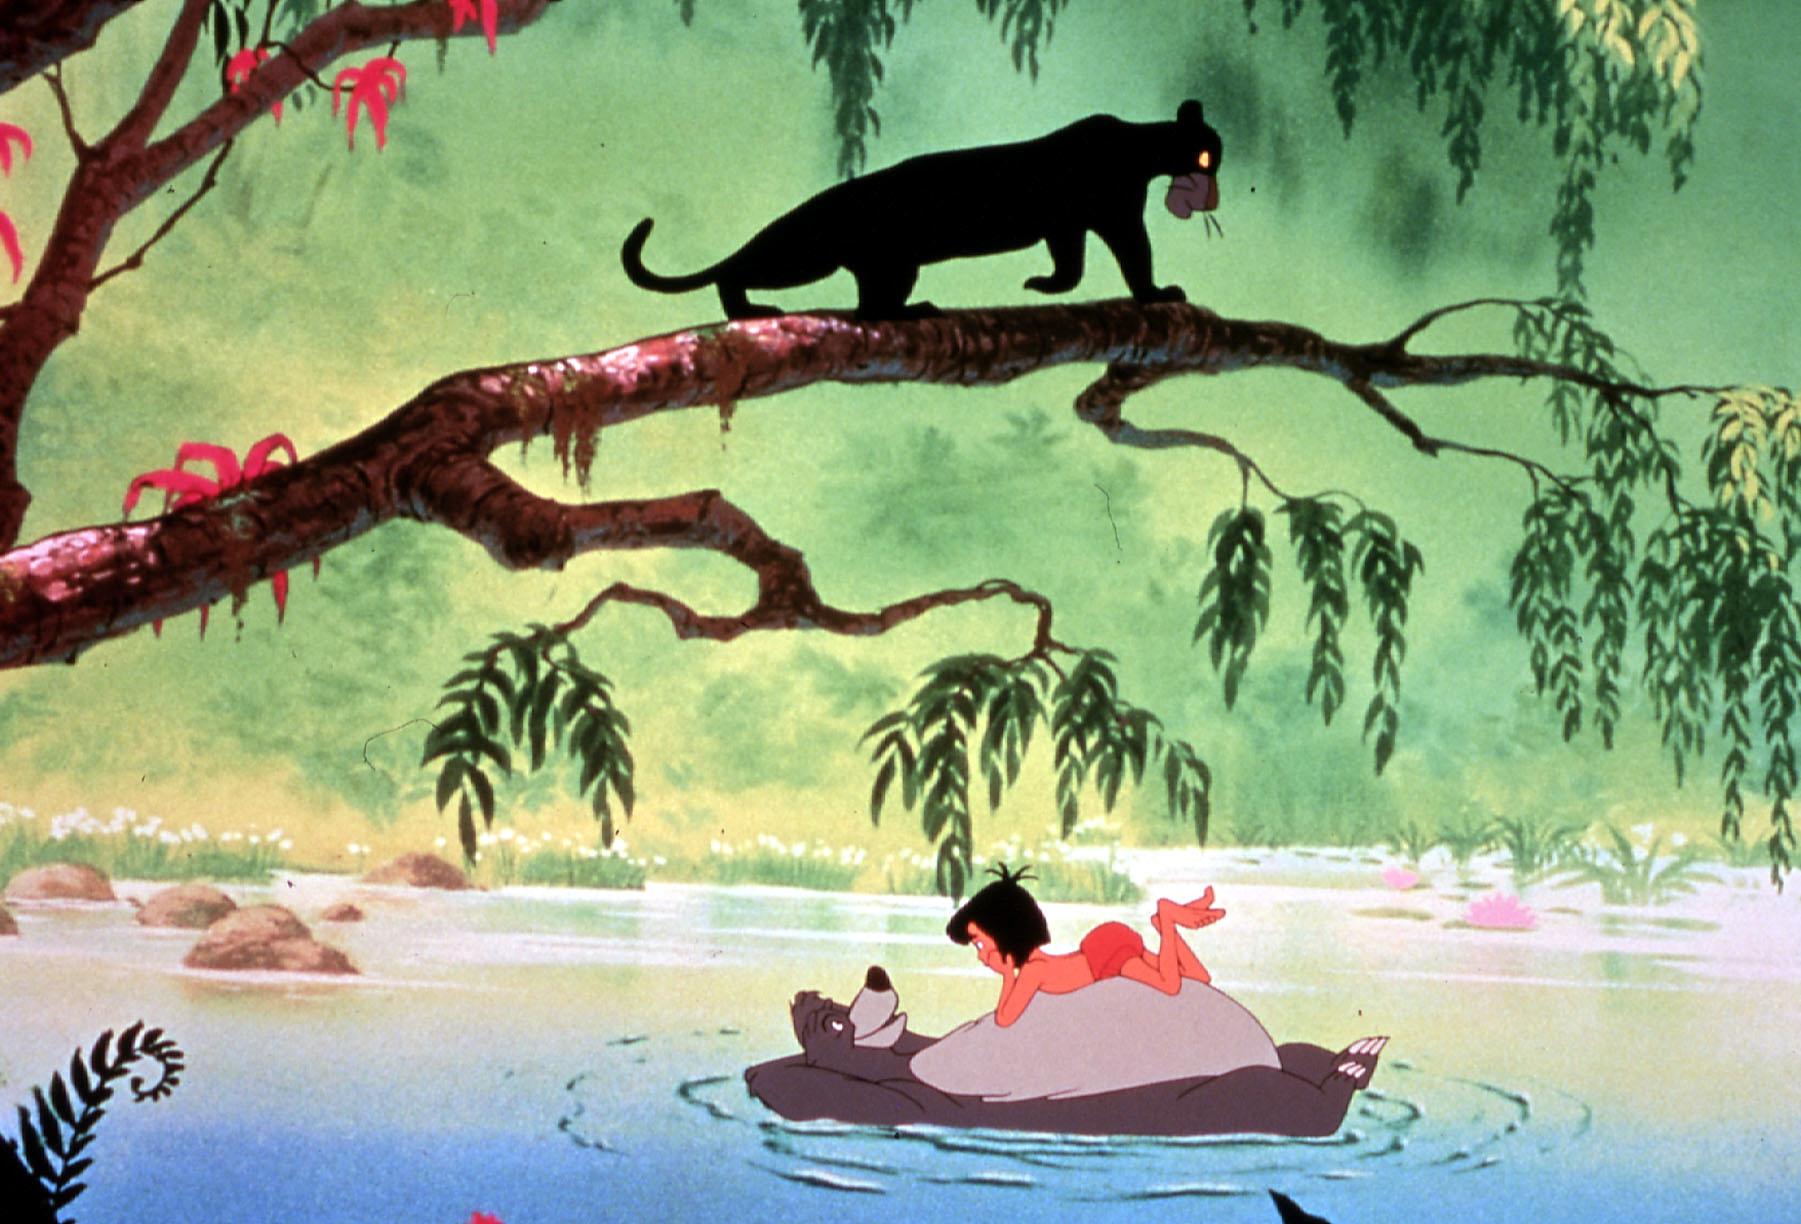 Who Are the Voices Behind Disney's Animated Film 'The Jungle Book'?